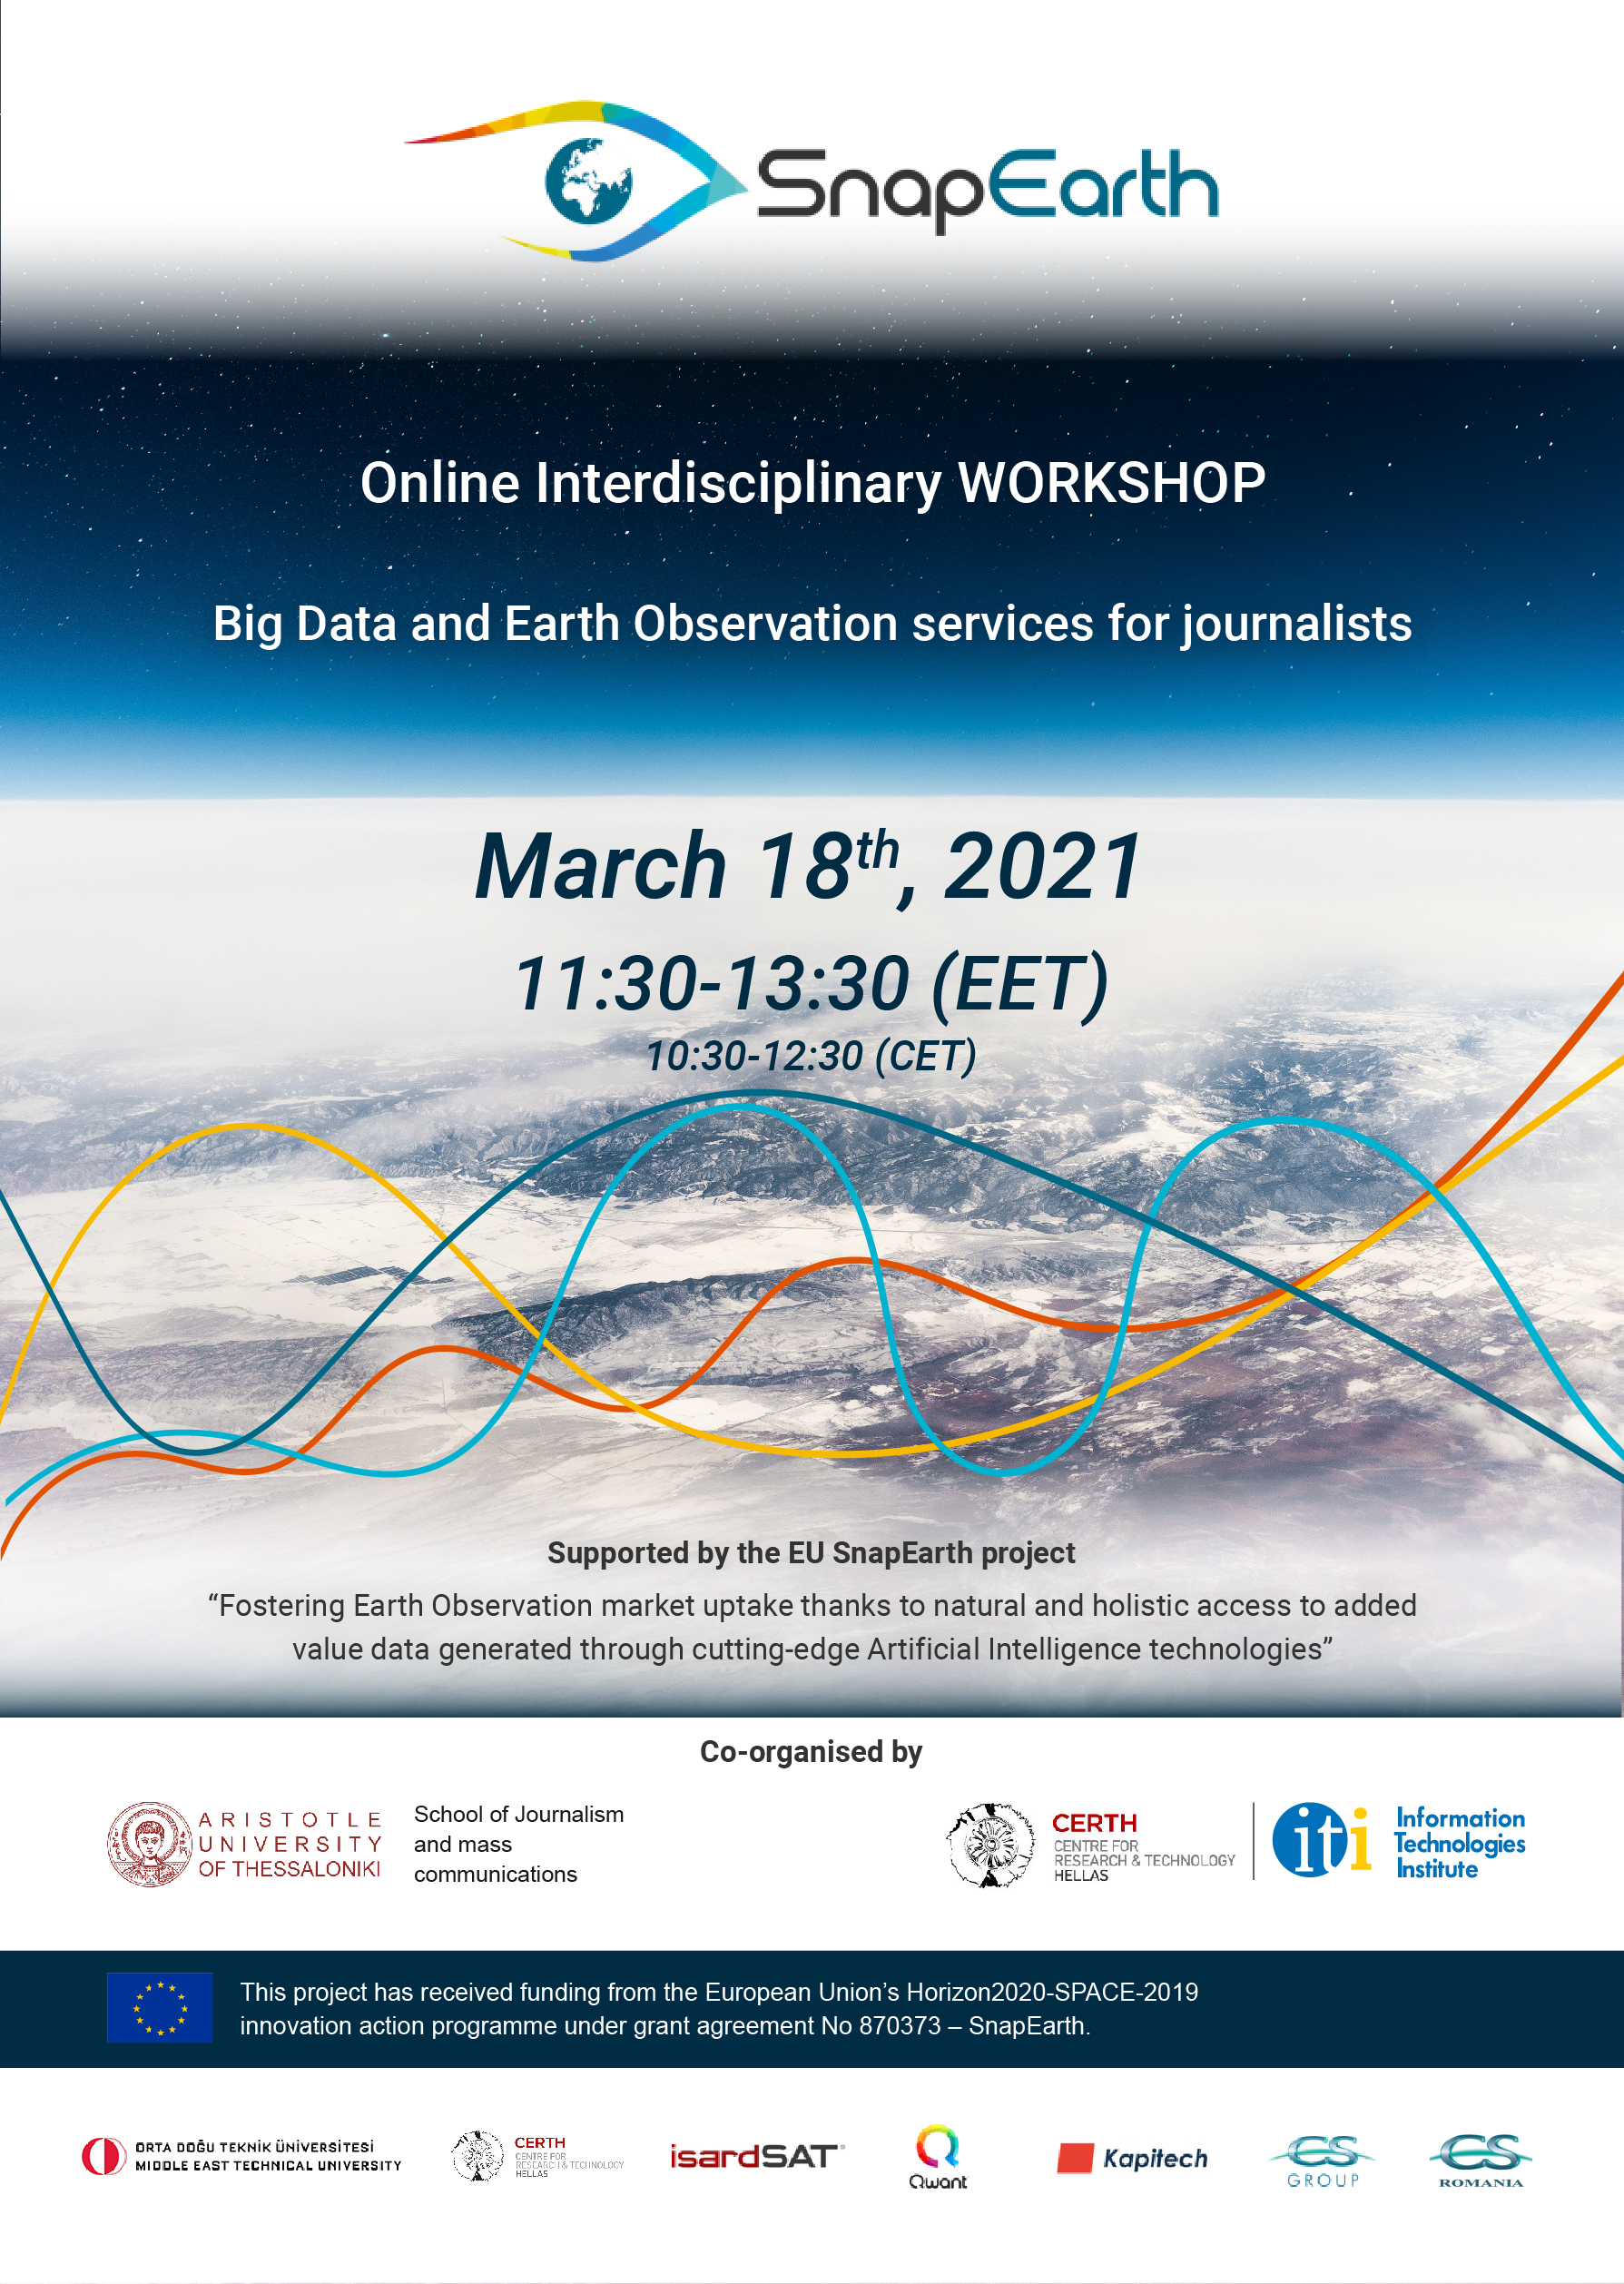 Interdisciplinary workshop on big data and Earth Observation services for journalists